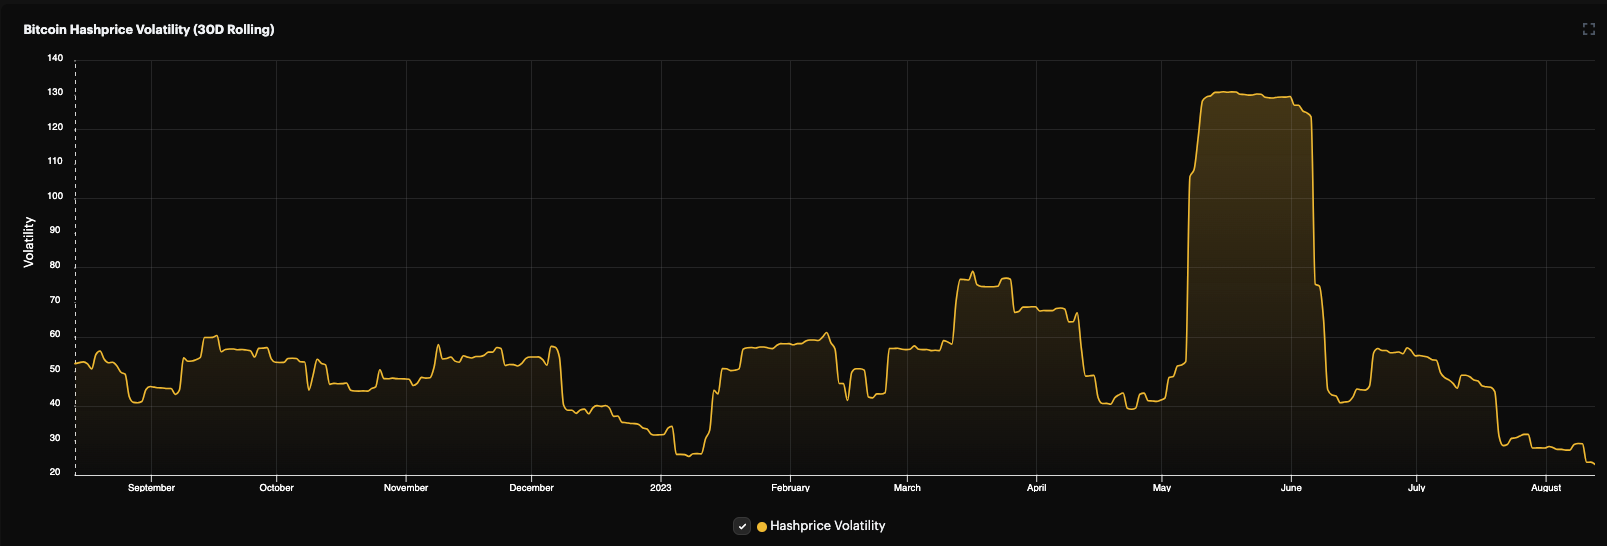 HAshprice volatility is at or near all-time lows